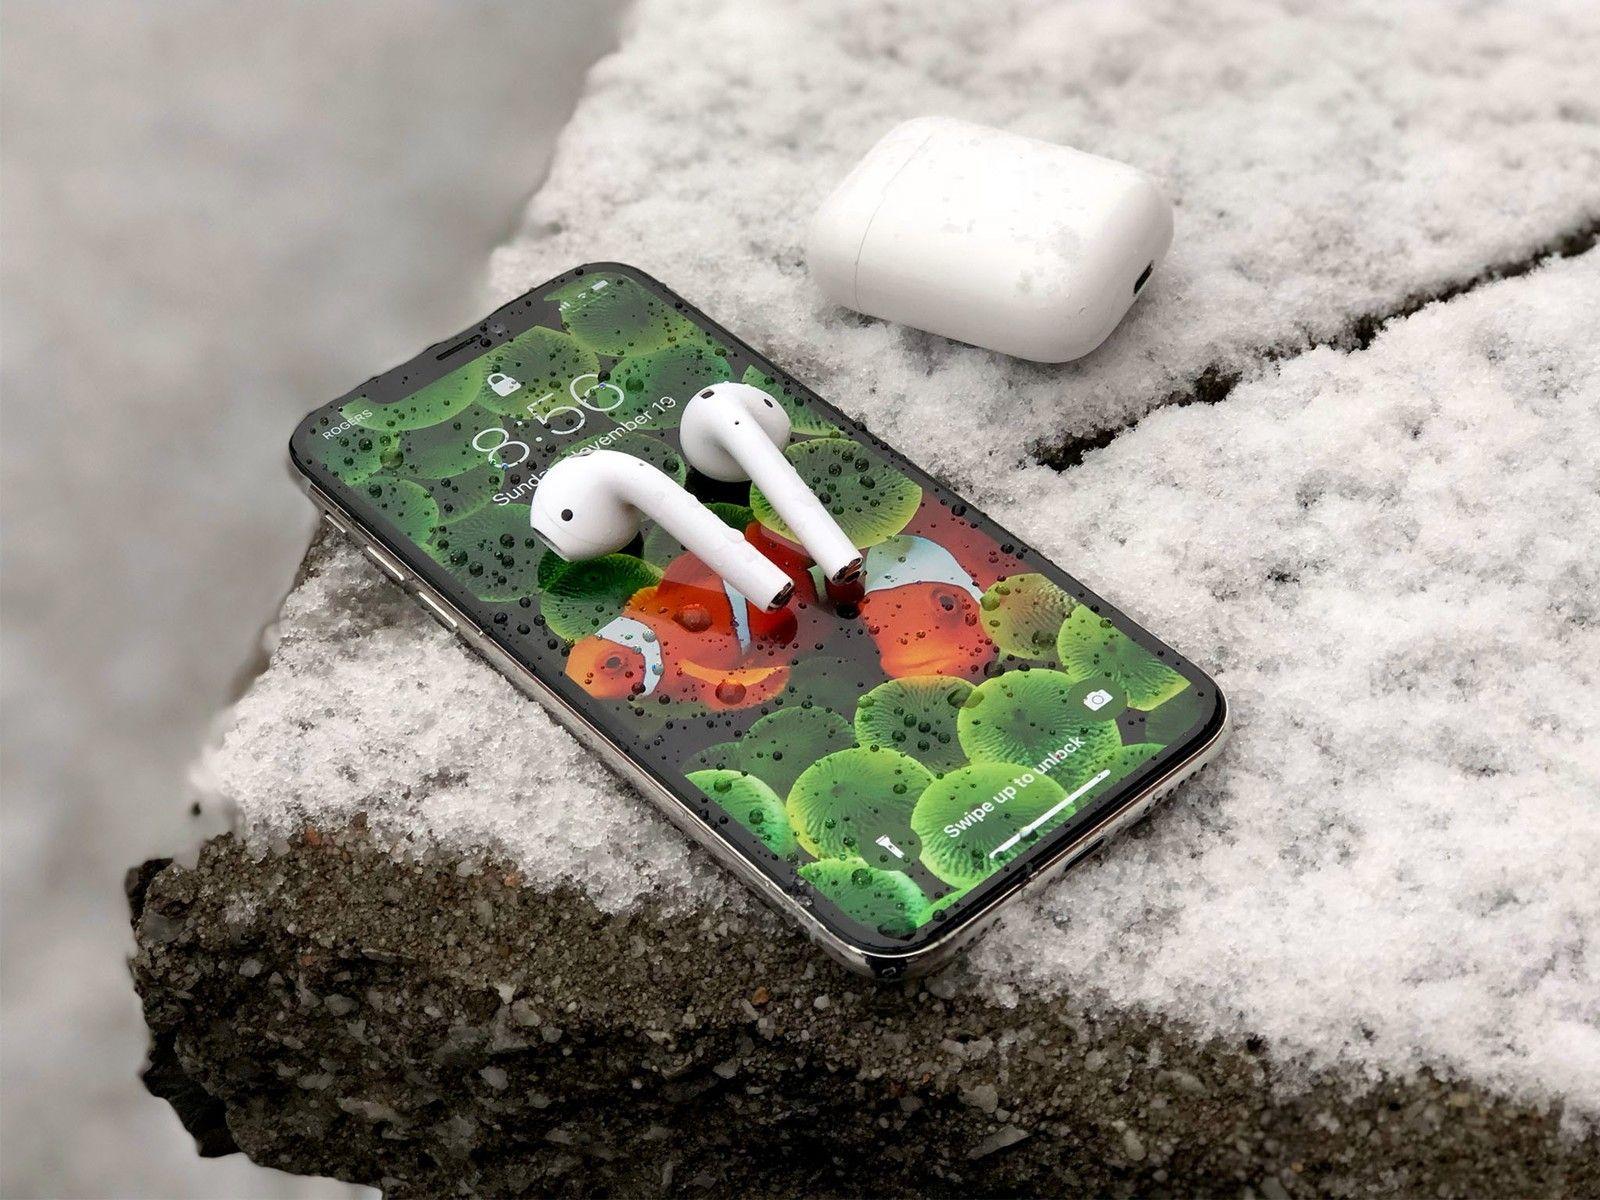 Imore Earbuds Buds iPhone Wallpaper Picturefunny